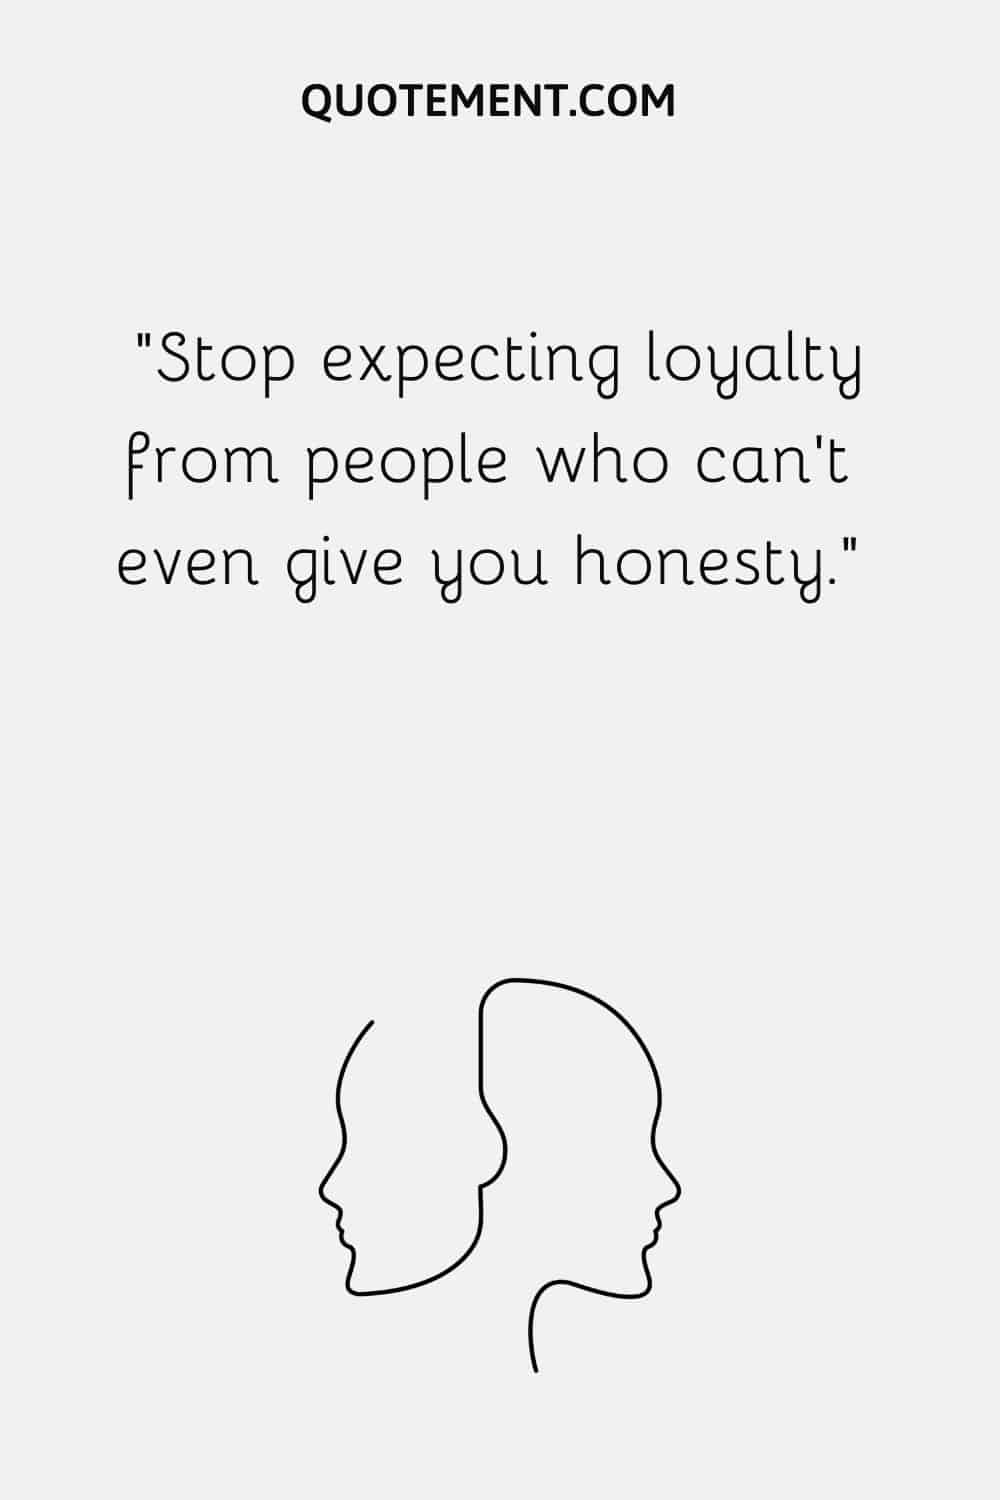 Stop expecting loyalty from people who can’t even give you honesty